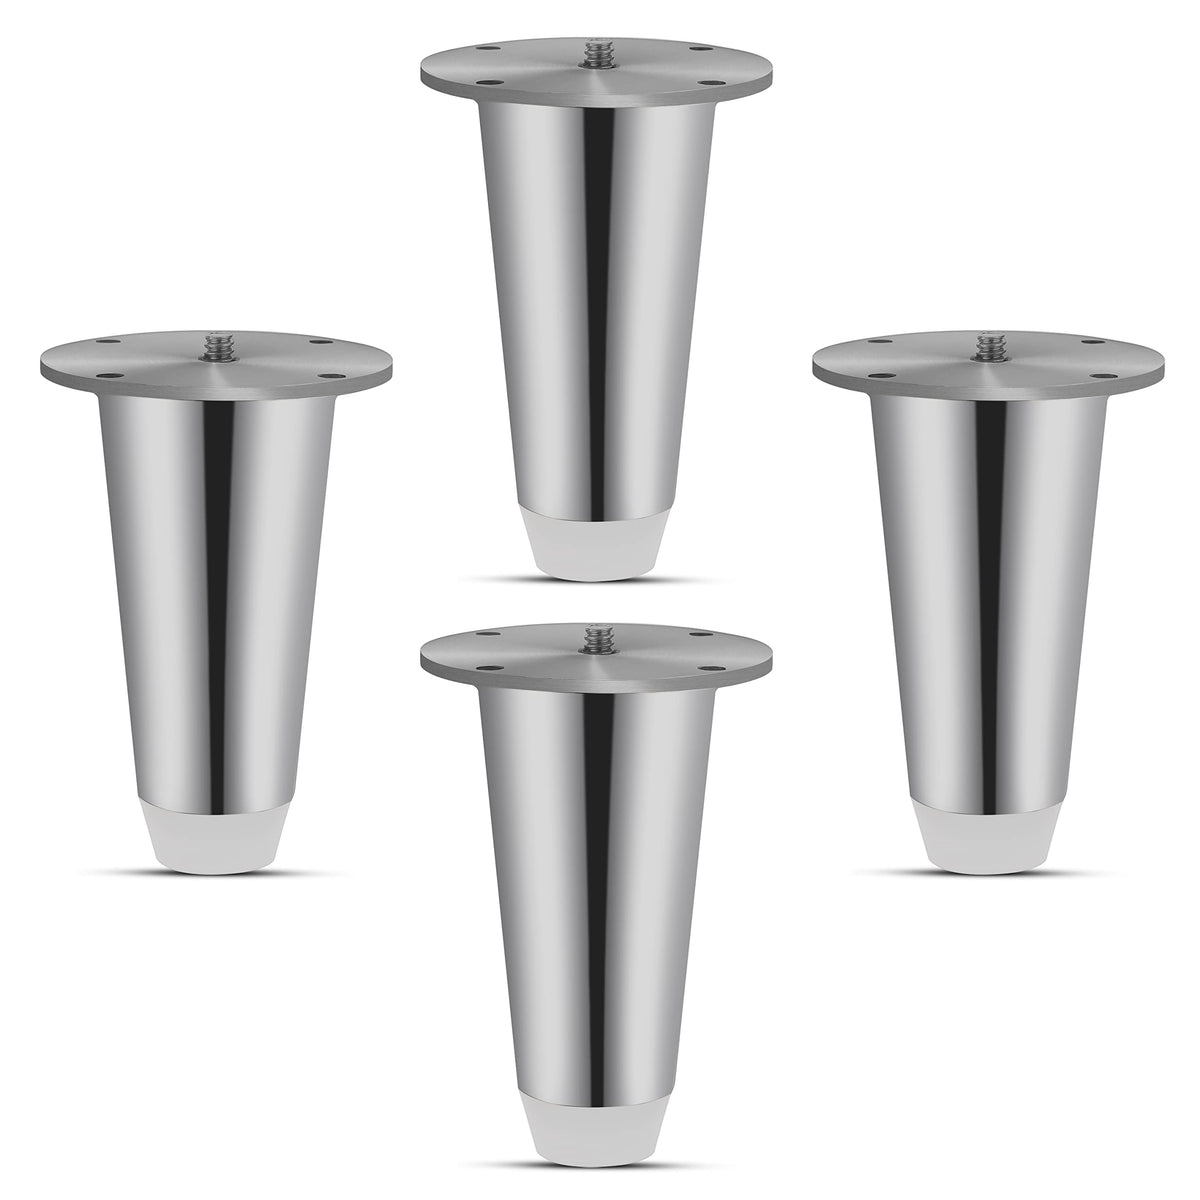 Plantex Heavy Duty Stainless Steel 4 inch Sofa Leg/Bed Furniture Leg Pair for Home Furnitures (DTS-53, Chrome) – 8 pcs